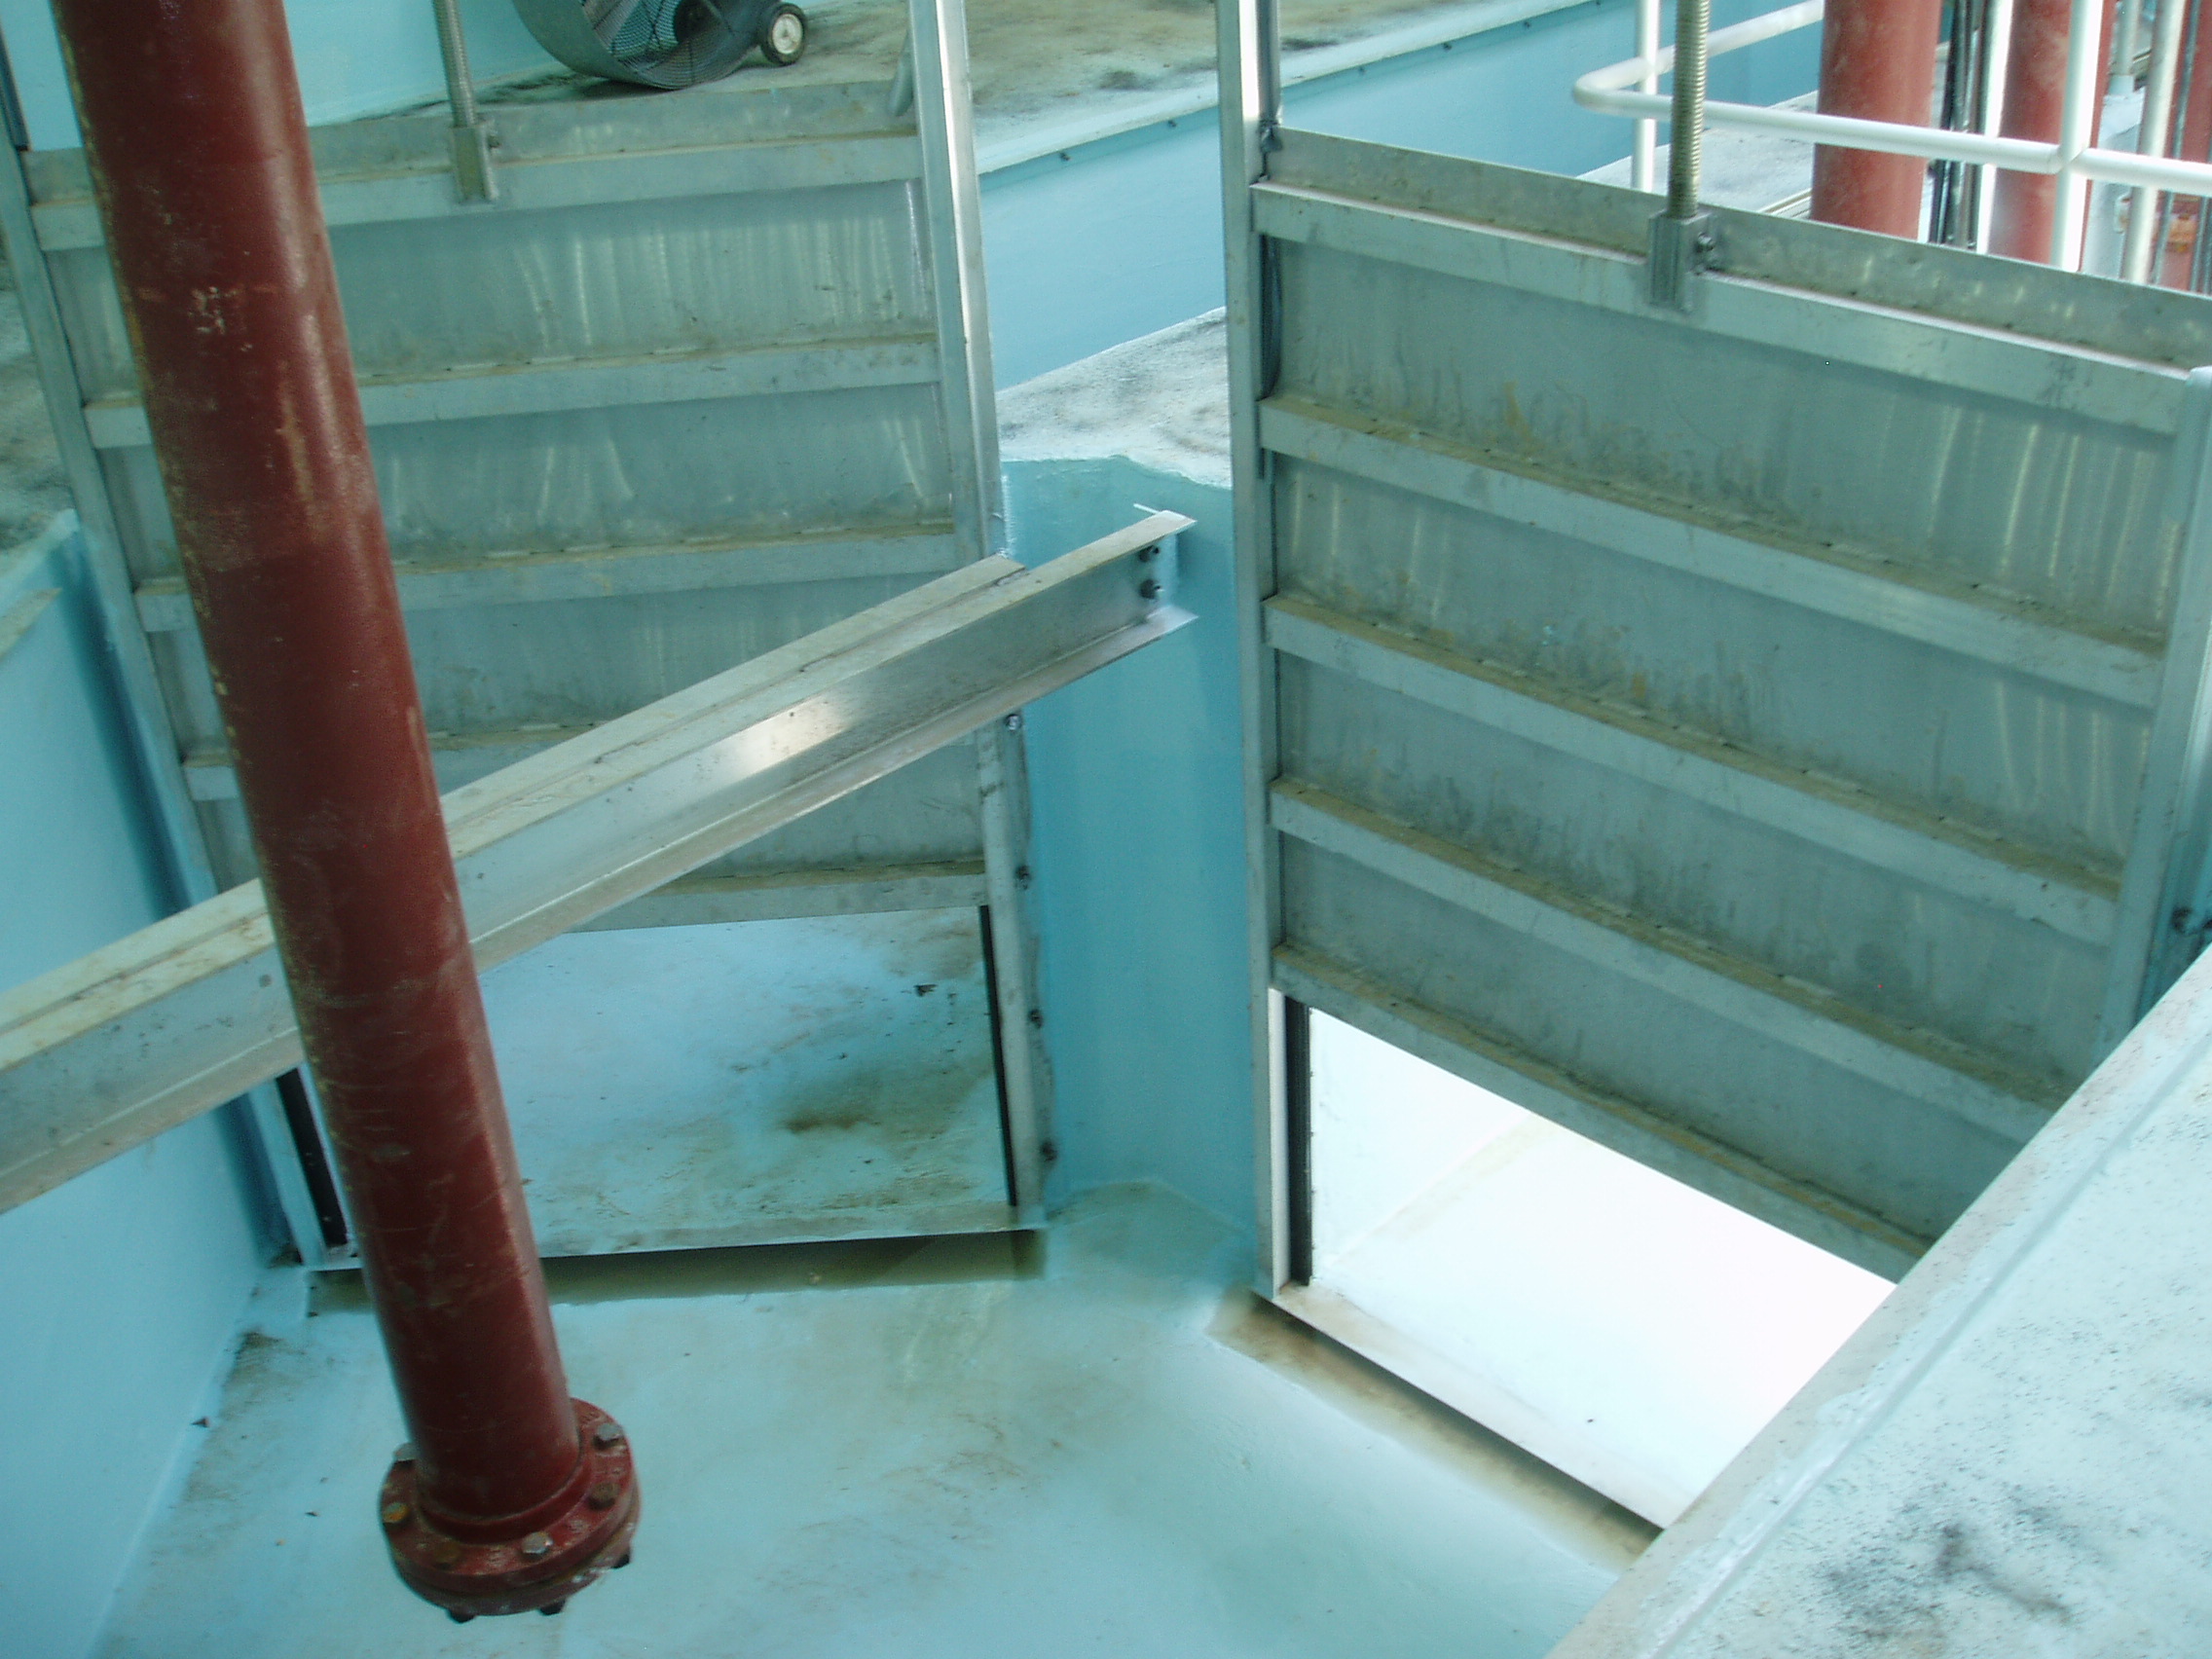 Raven Epoxy applied to sluice gate channels at a wastewater treatment plant. 